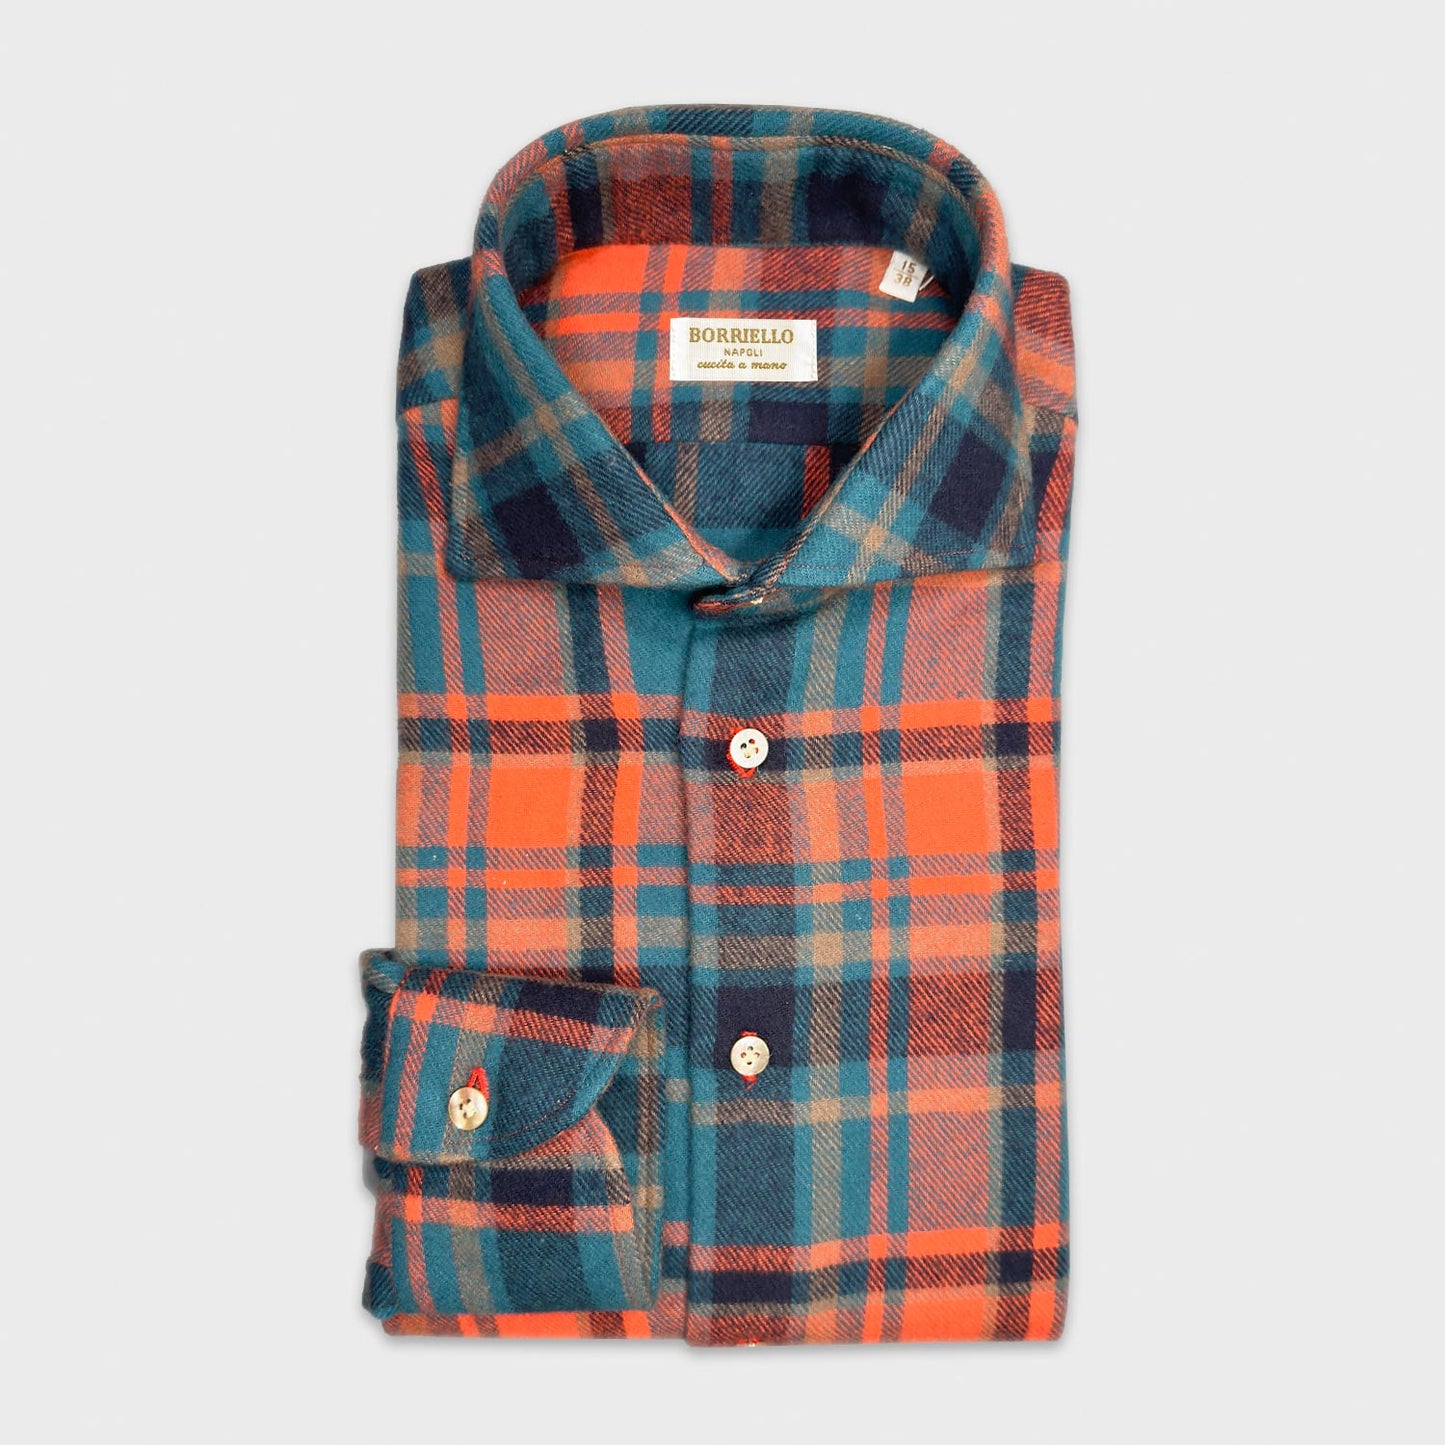 Orange Cotton Flannel Plaid Shirt Borriello Napoli. Casual plaid shirt made with a finest and soft Italian flannel cotton, soft finish and silky touch, comfortable to wear in the middle seasons and in winter in your classic or sporty outfit.